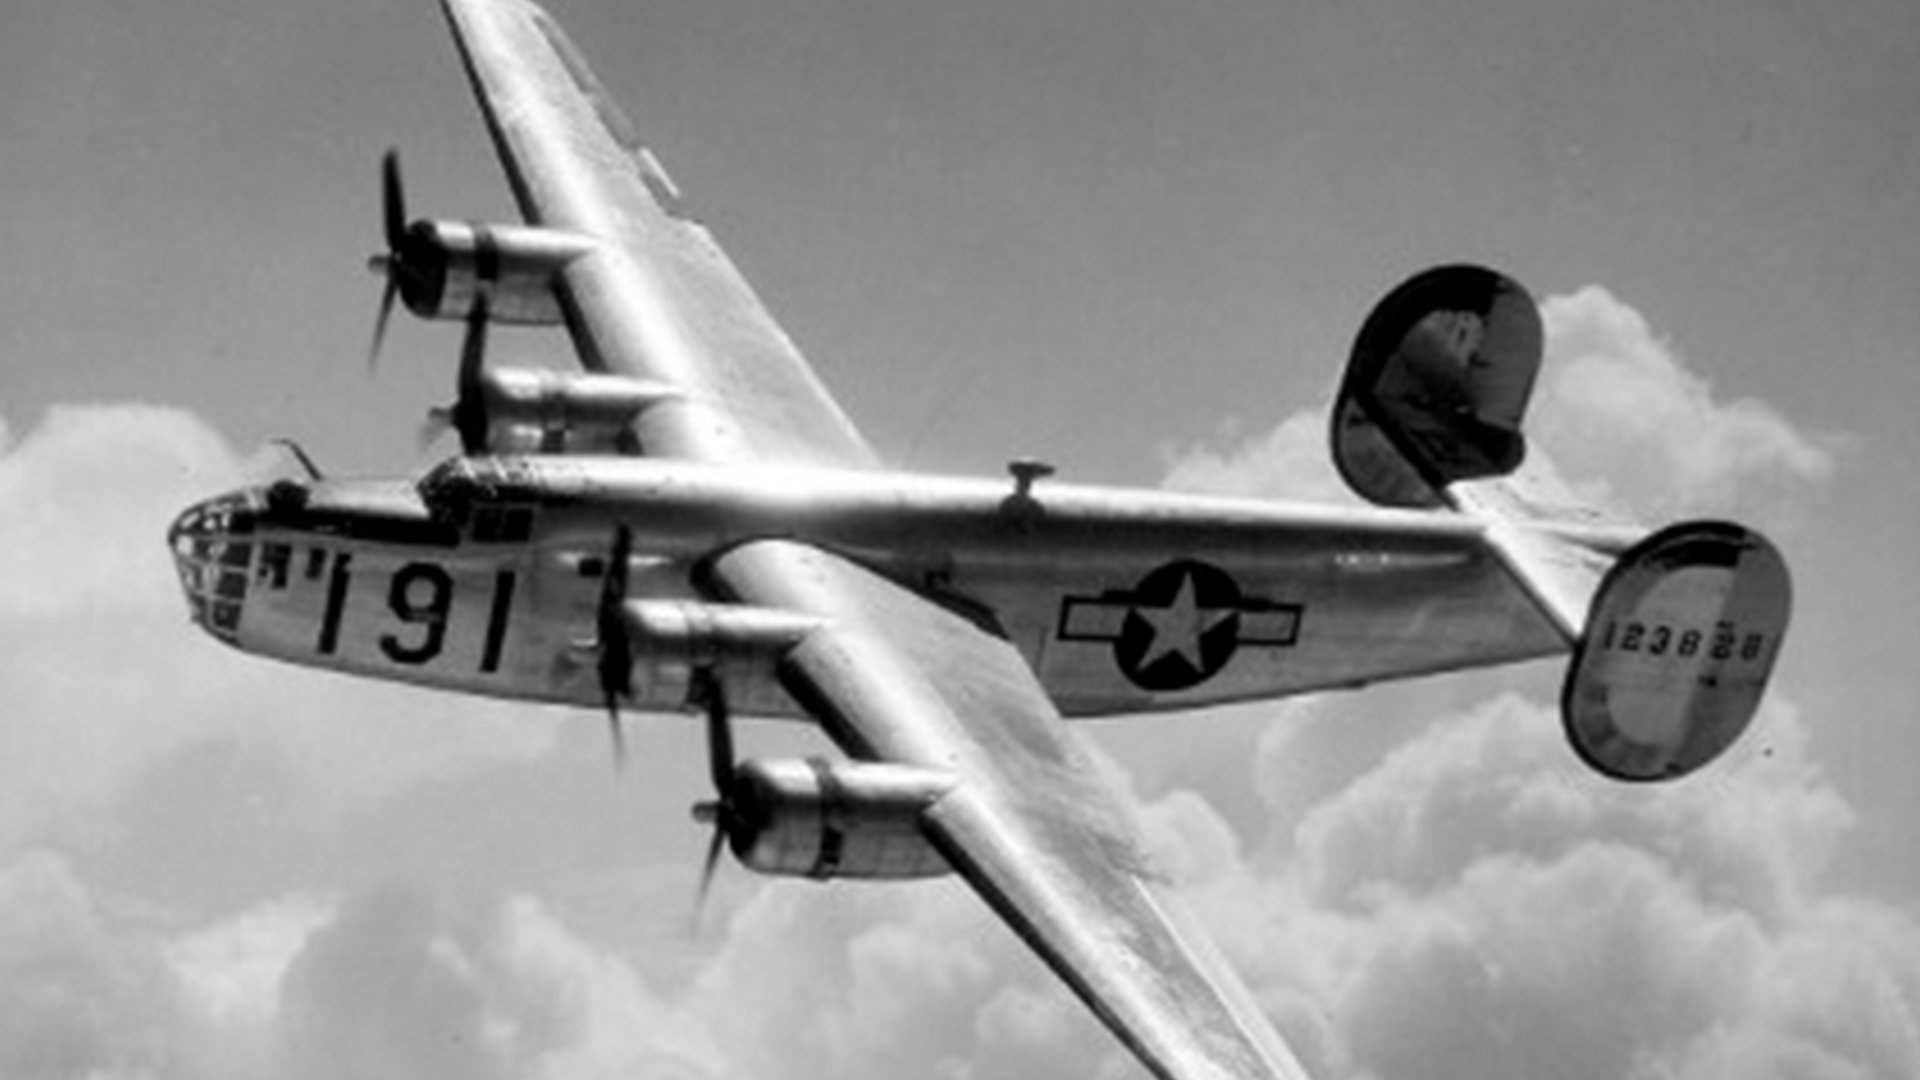 A black-and-white photo of a B-24 Liberator bomber used in World War II.